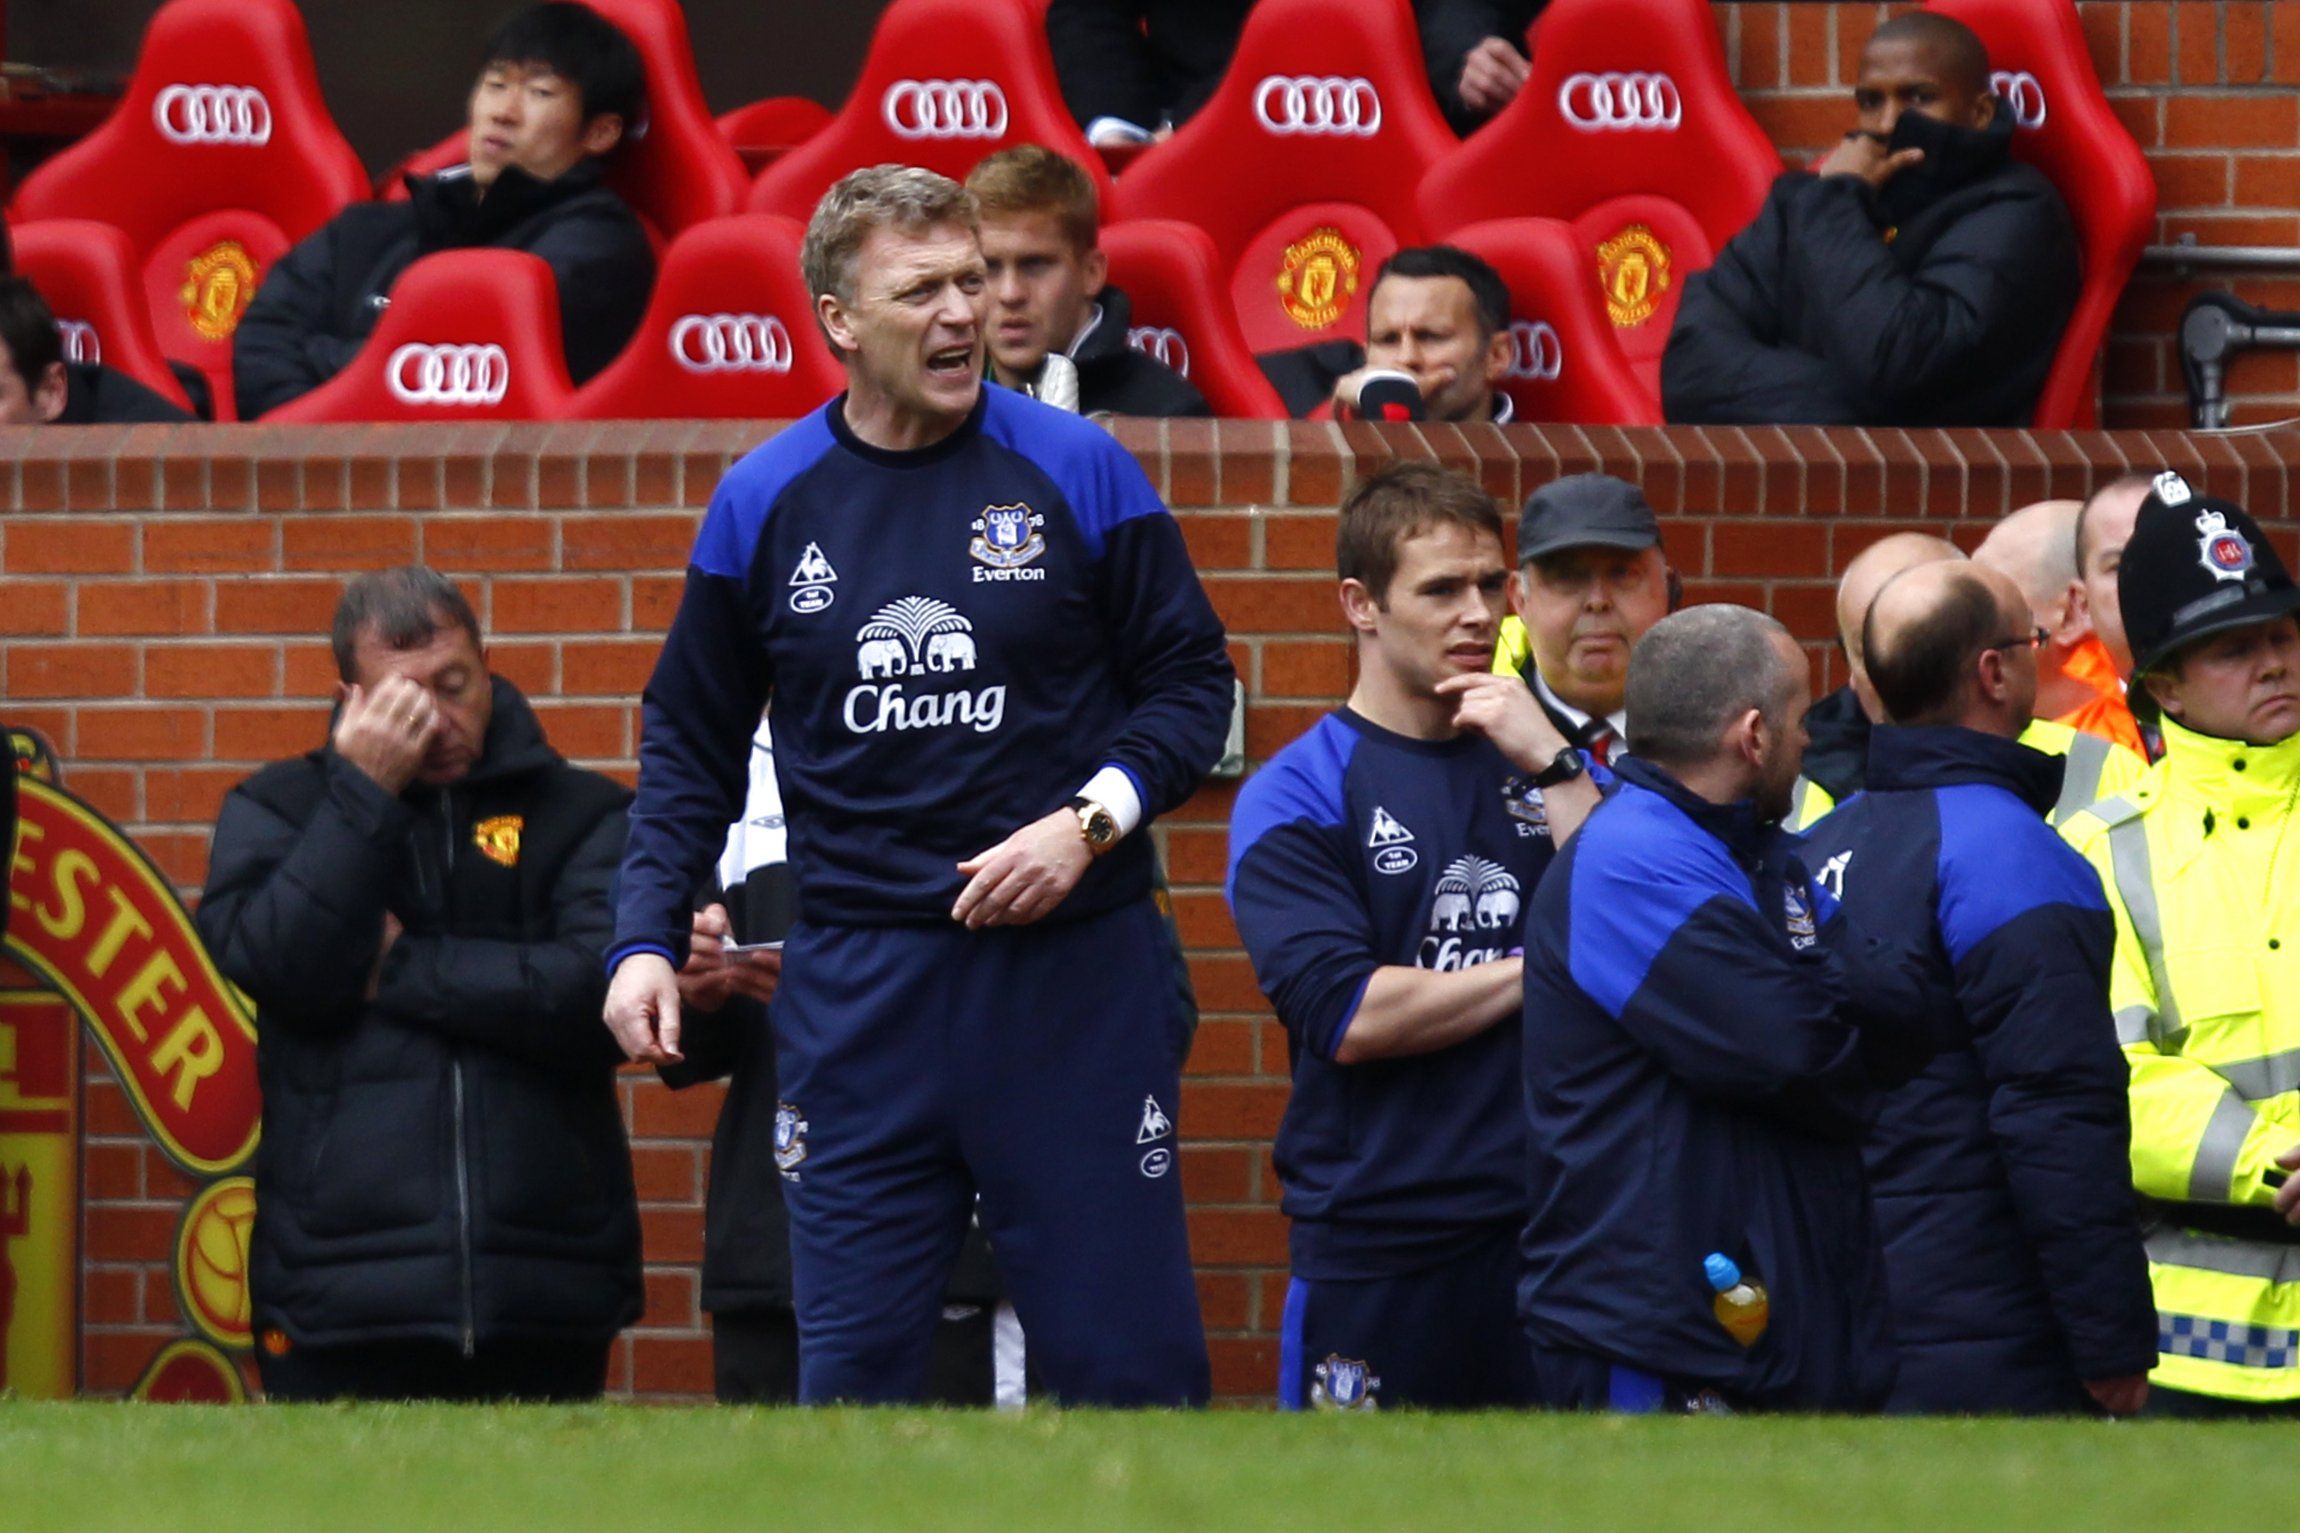 Everton manager David Moyes on the bench at Old Trafford